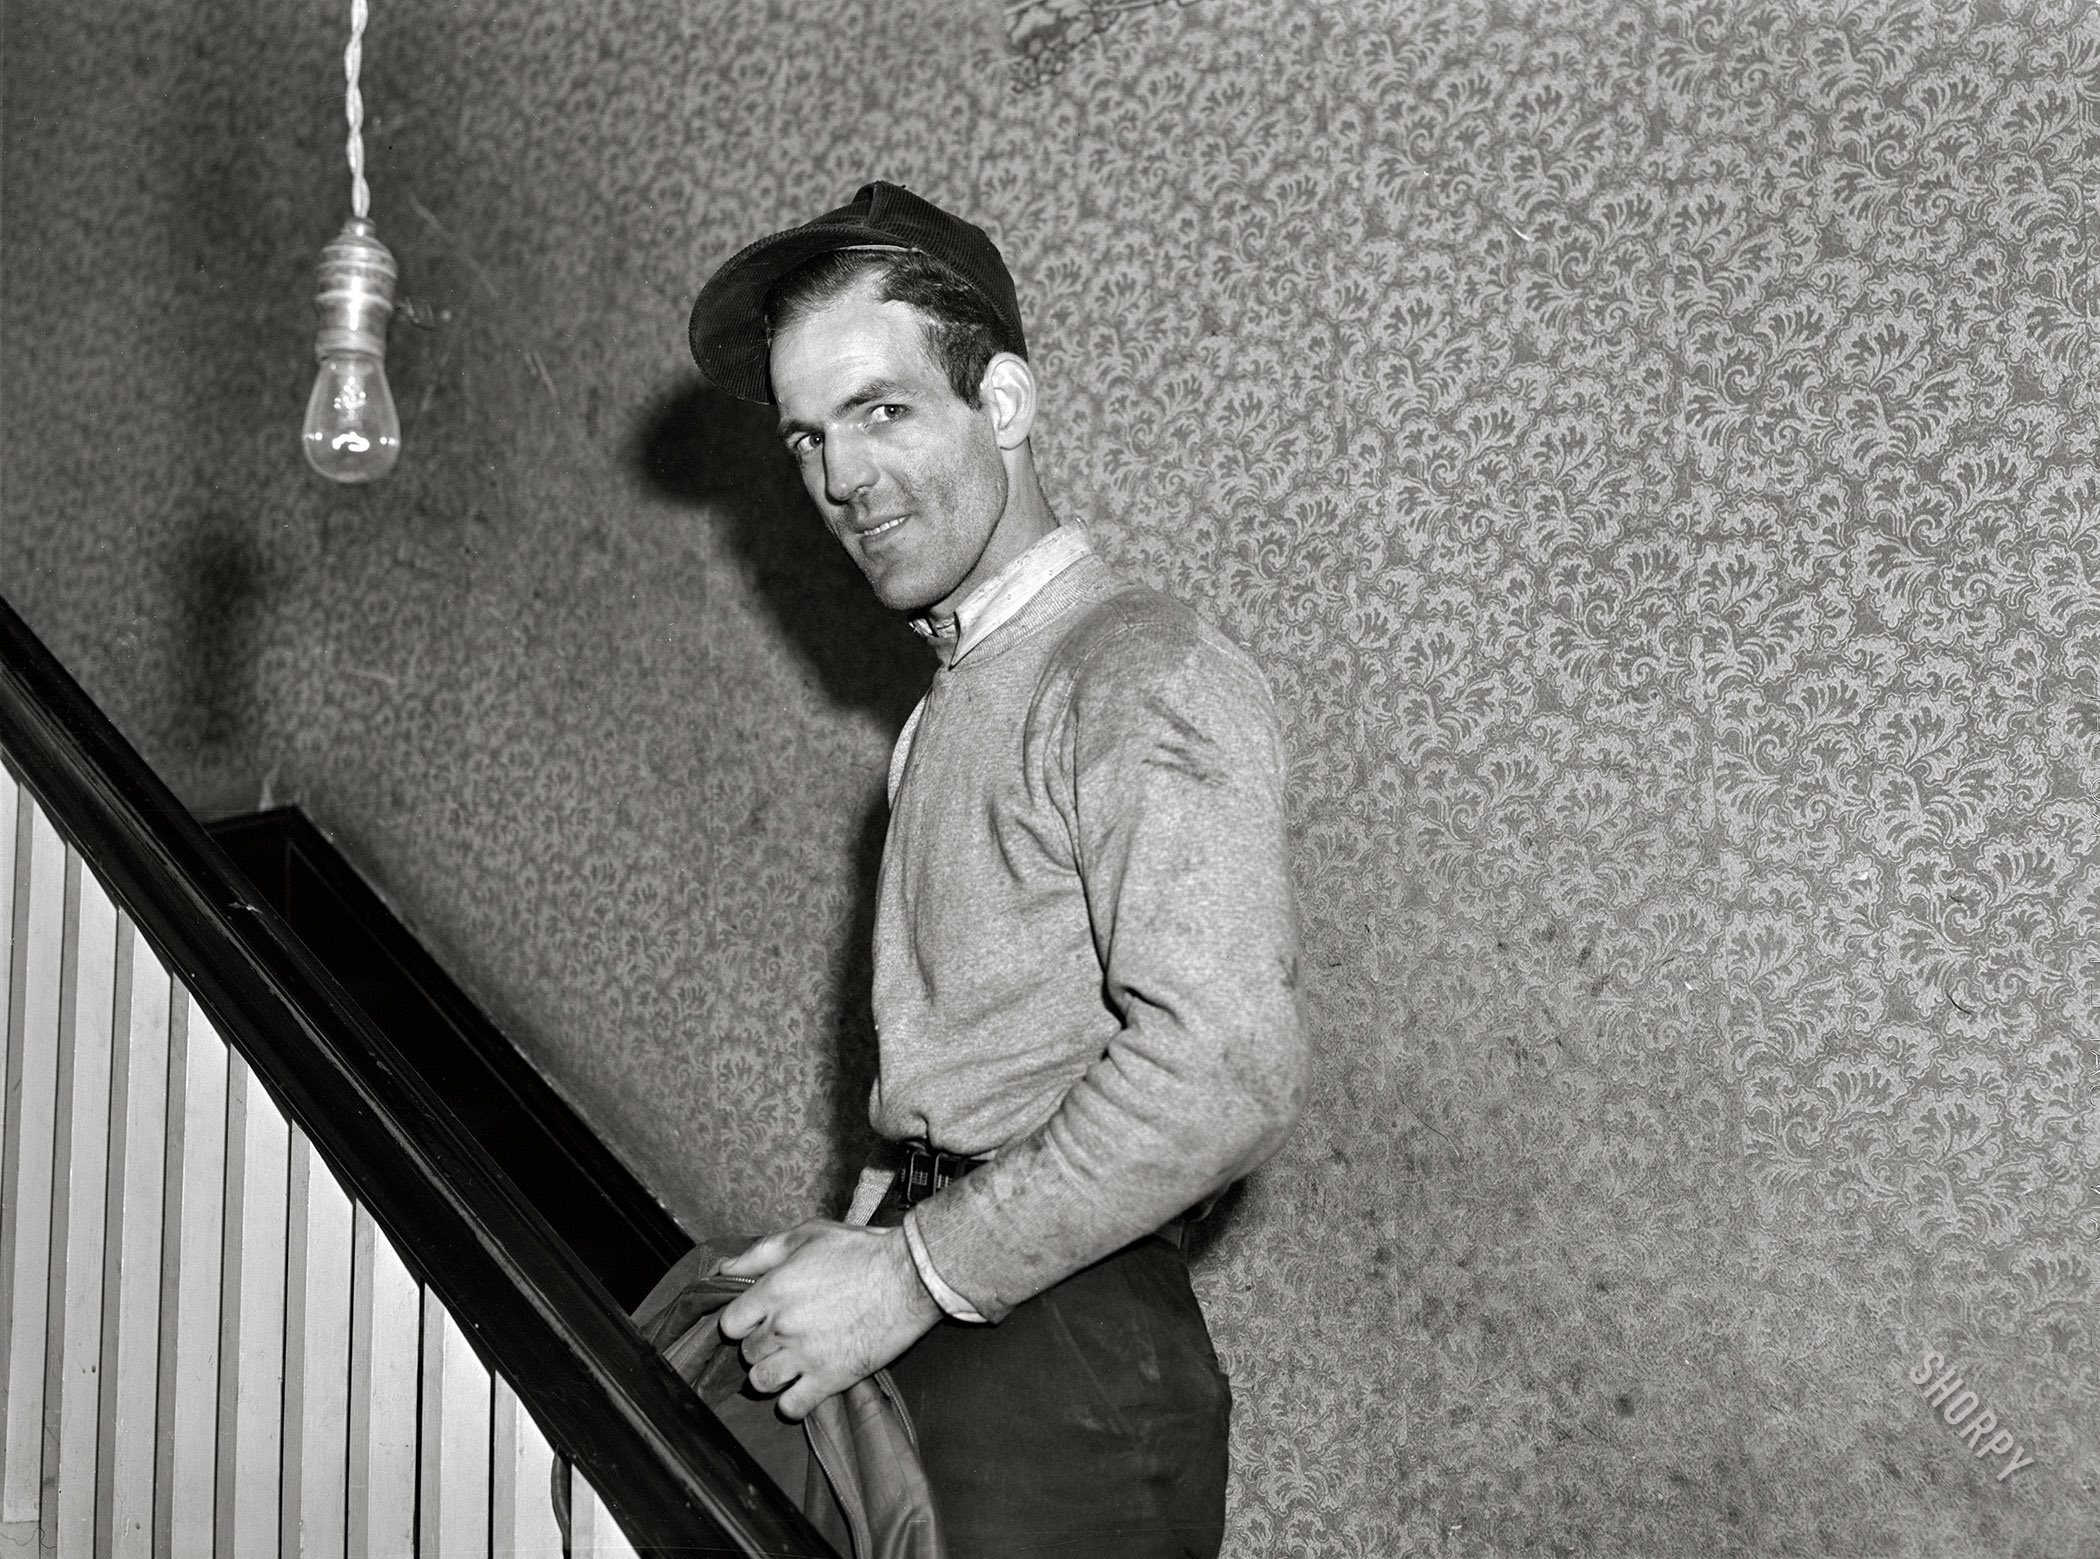 December 1940. Radford, Virginia. "Hercules Powder Plant employee going upstairs. Mrs. Pritchard's boardinghouse. Eighteen men board here." One of the gents last seen here. Acetate negative by John Vachon for the Farm Security Administration. View full size.